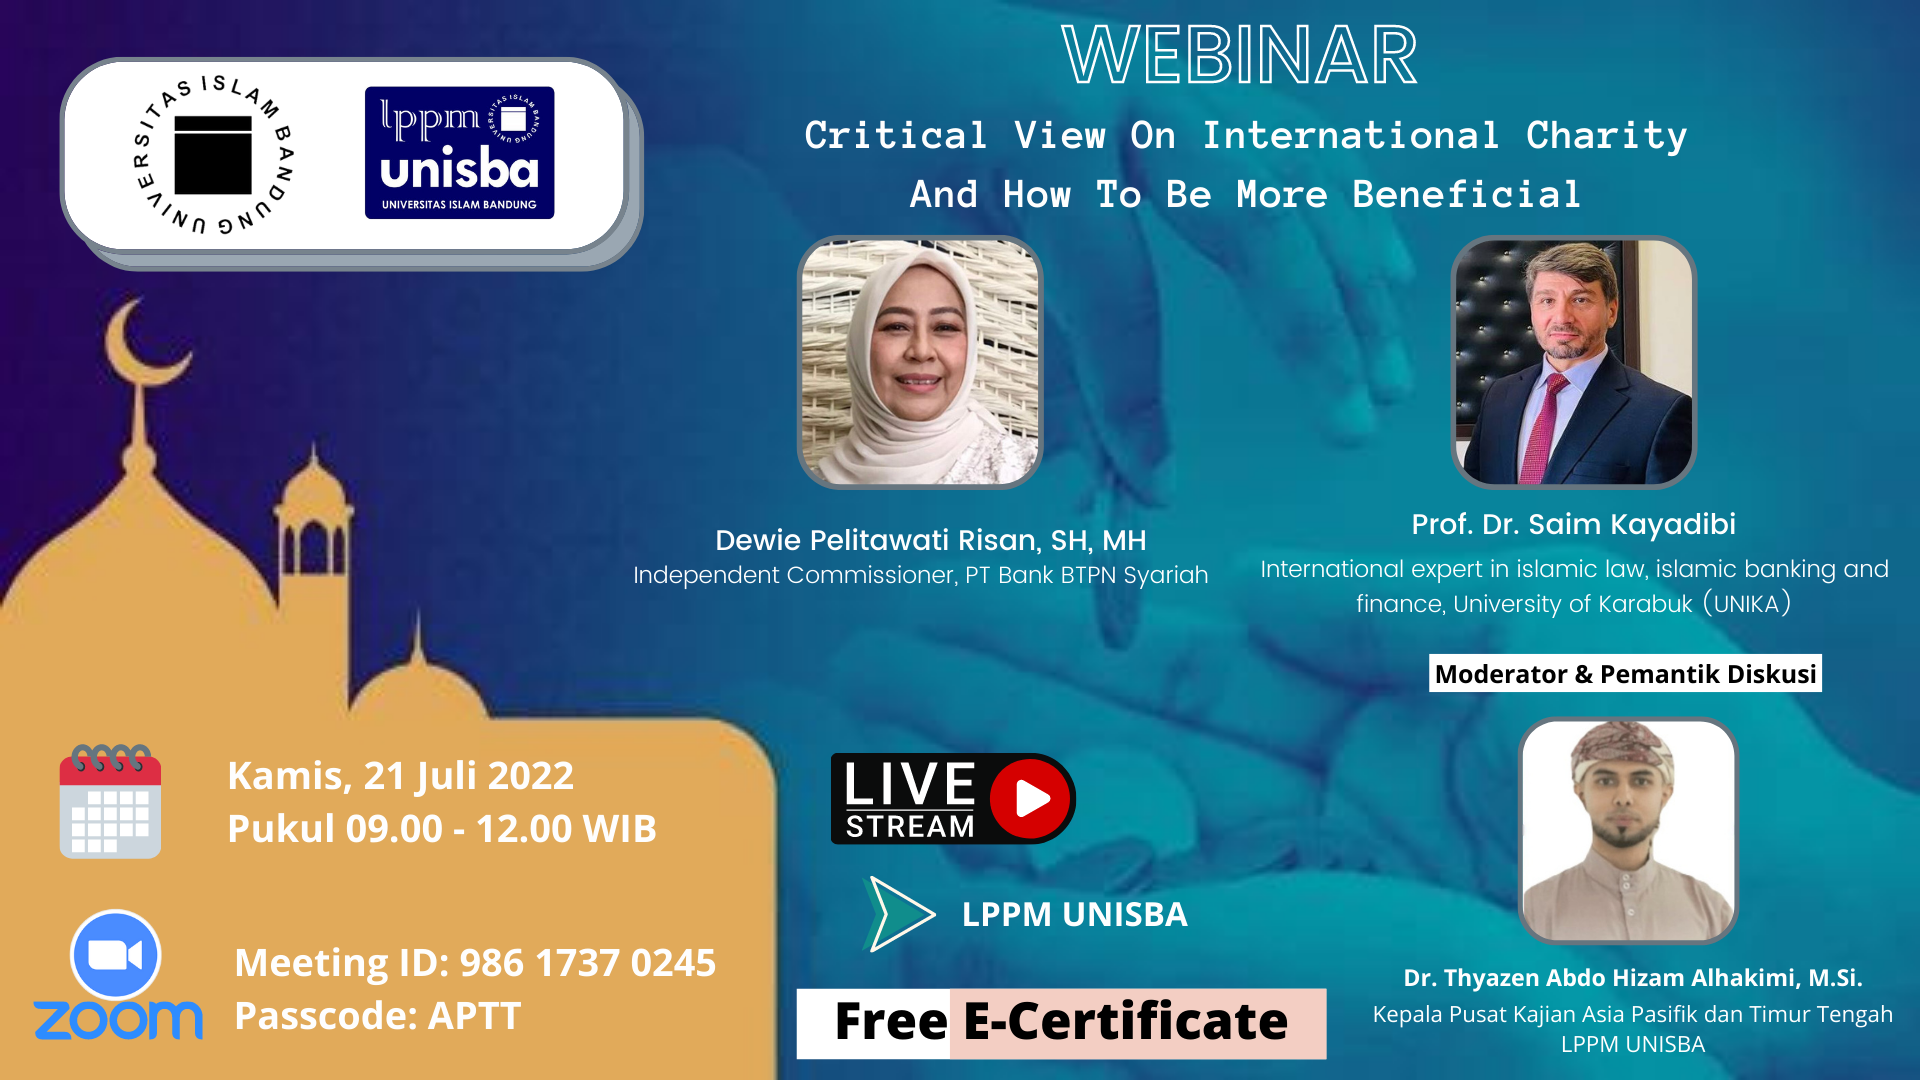 Webinar in International Charity is the title “Critical View On International Charity And How To Be More Beneficial”